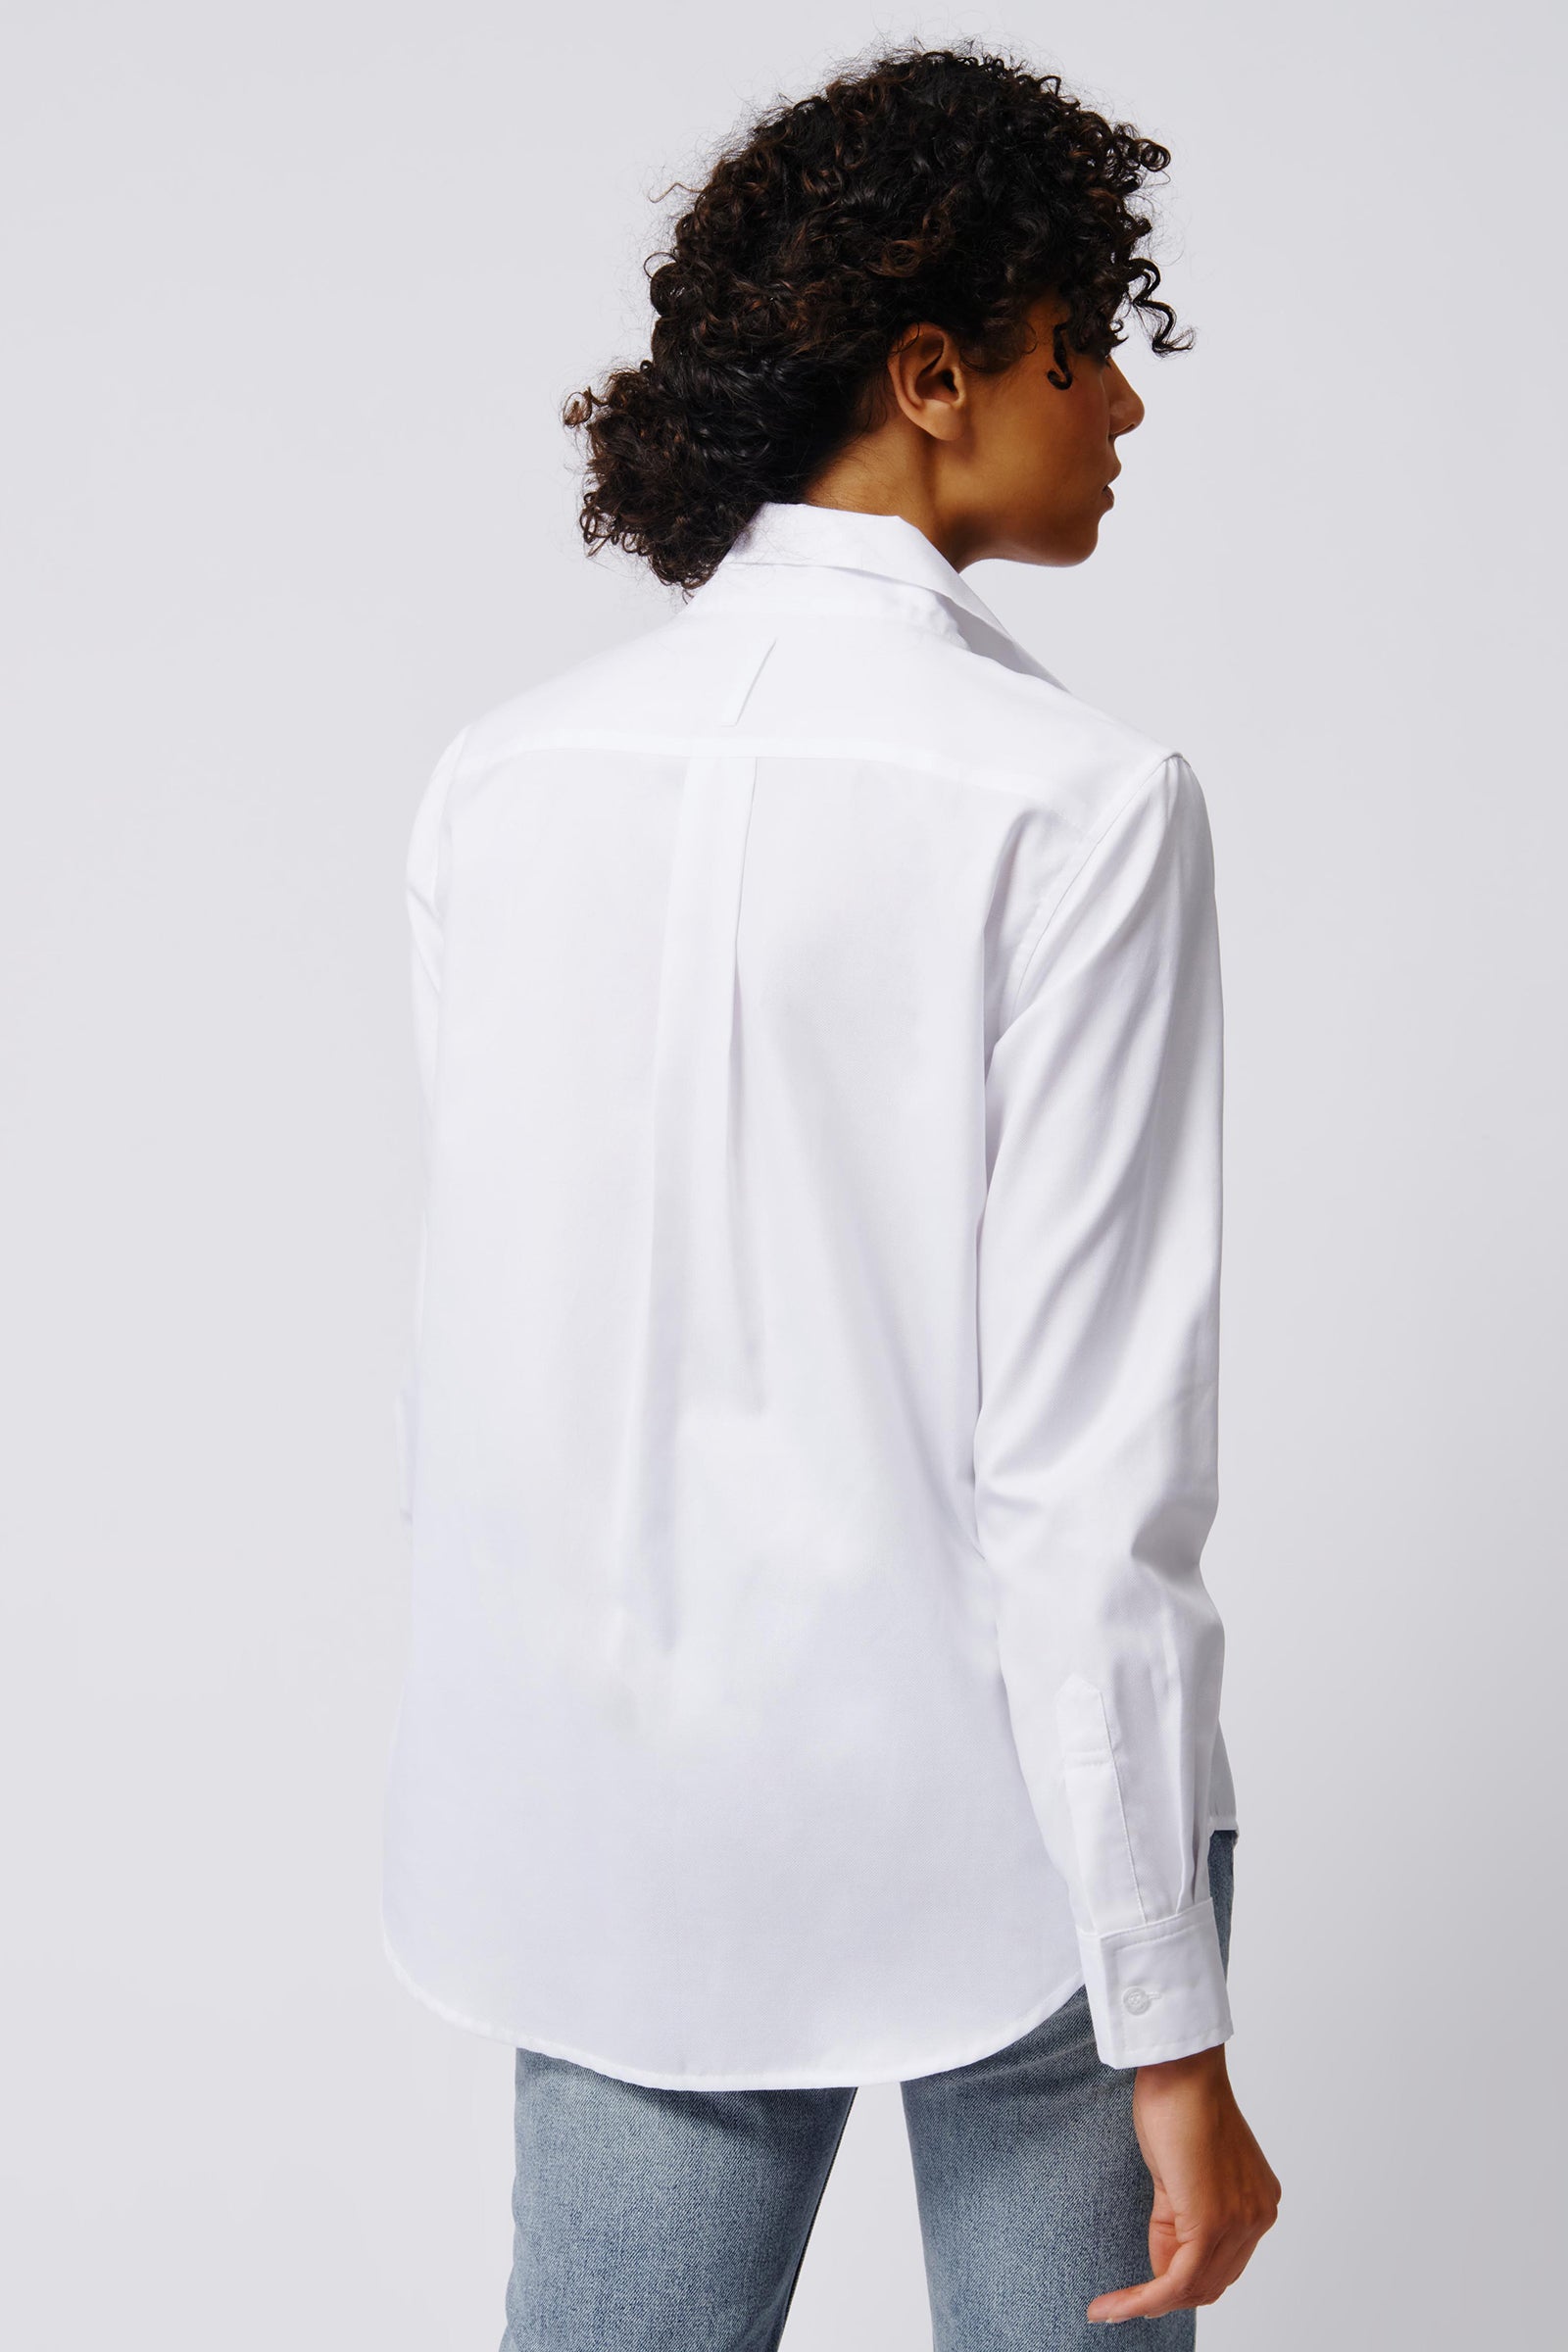 Kal Rieman Ginna Box Pleat Shirt in White Pinpoint Oxford on Model Front View Crop 4